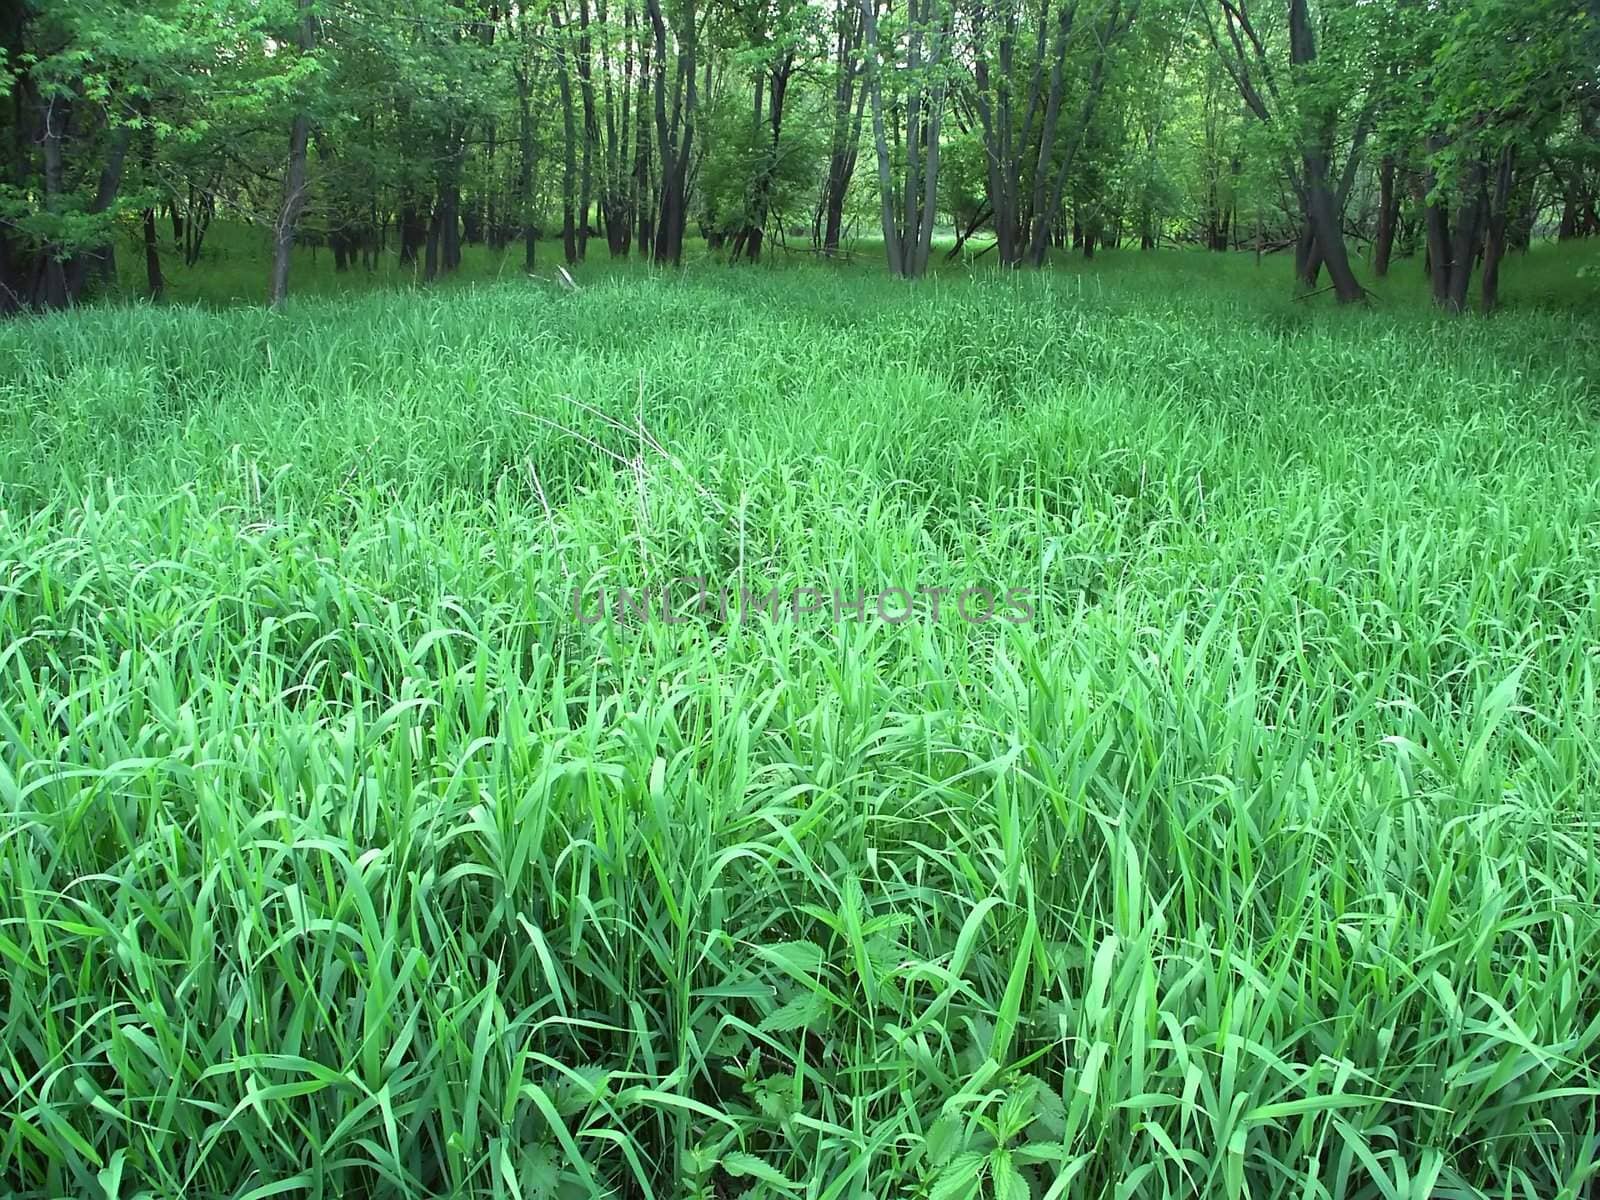 Dense understory vegetation covers the forest floor at Blackhawk Springs Forest Preserve in Illinois.